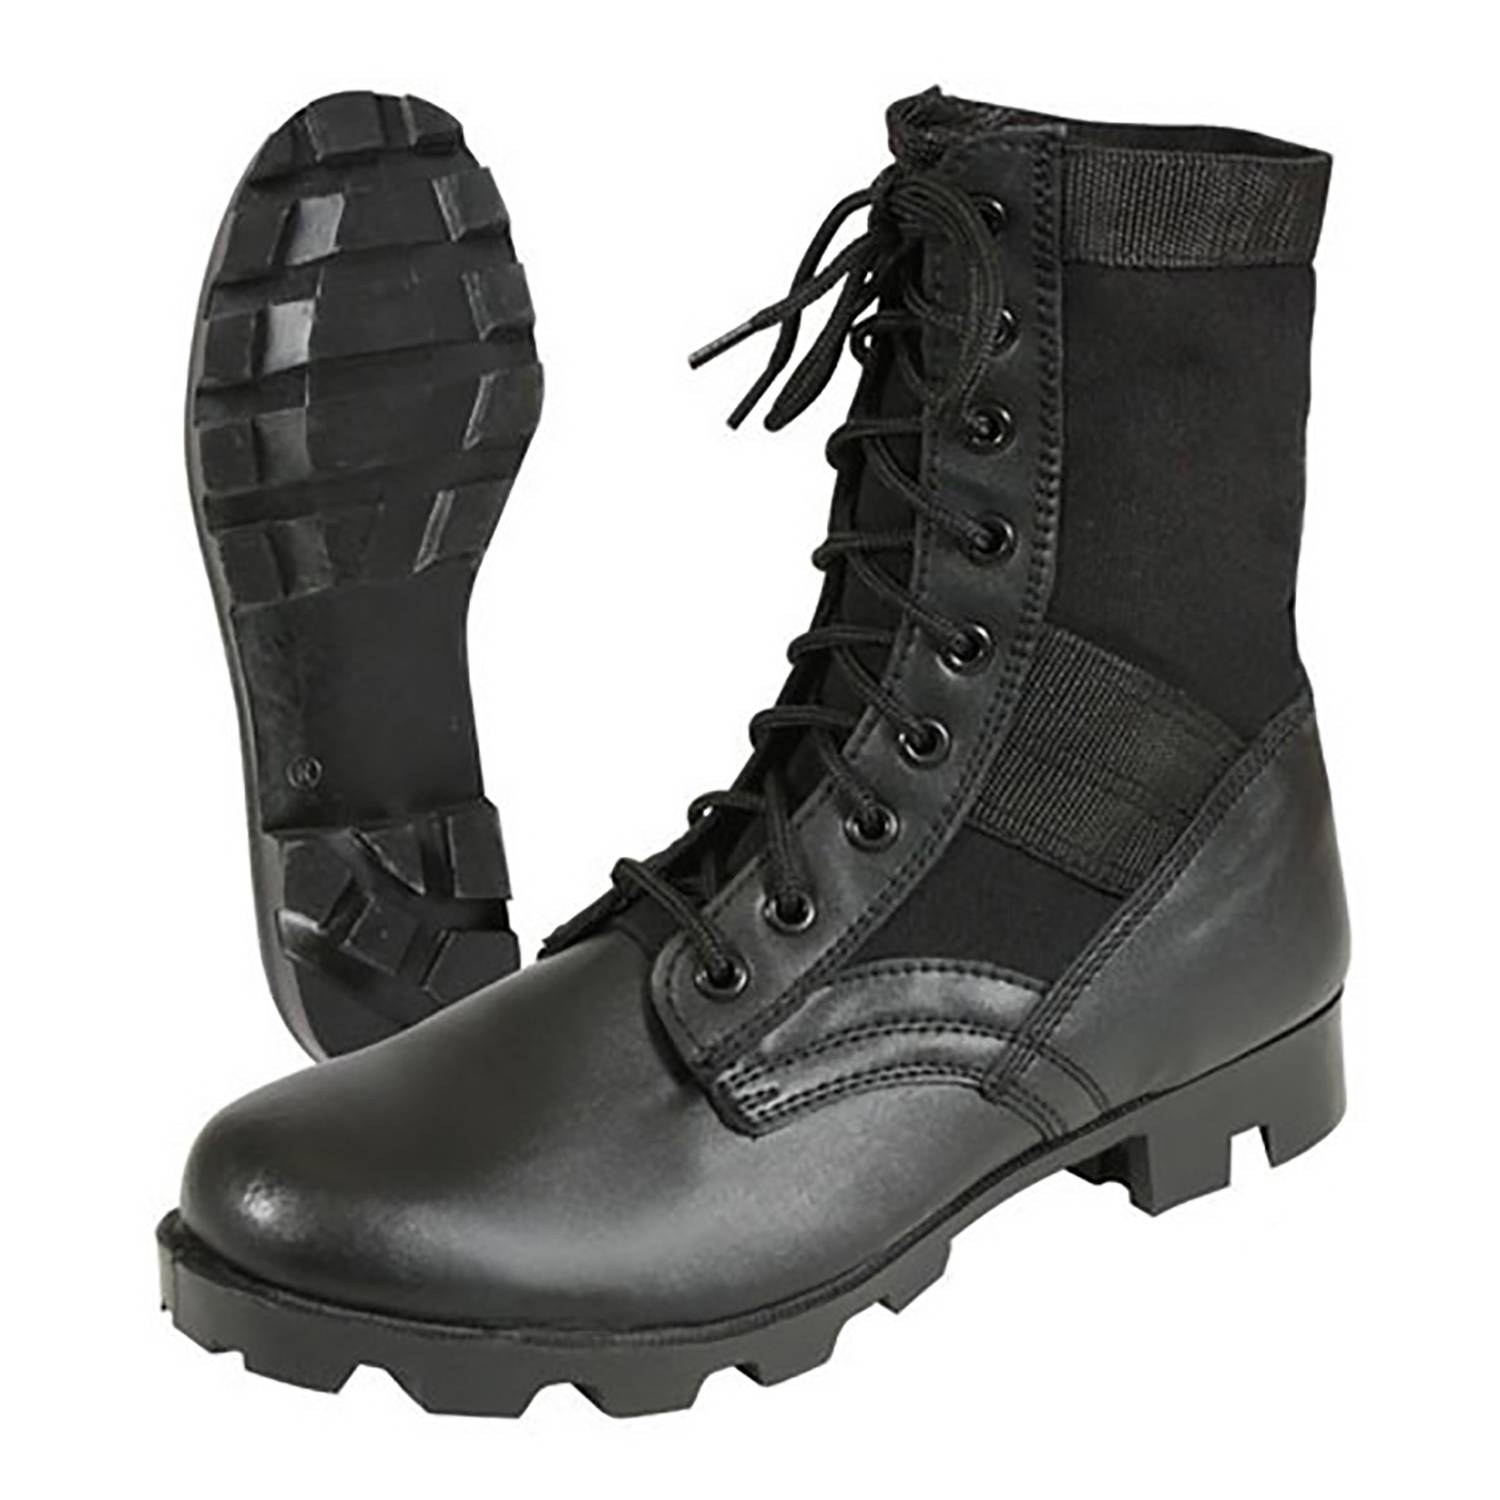 BOOT ZIPPERS GENUINE LEATHER LACE IN 9 HOLE EYELET MILITARY COMBAT JUNGLE  BOOTS